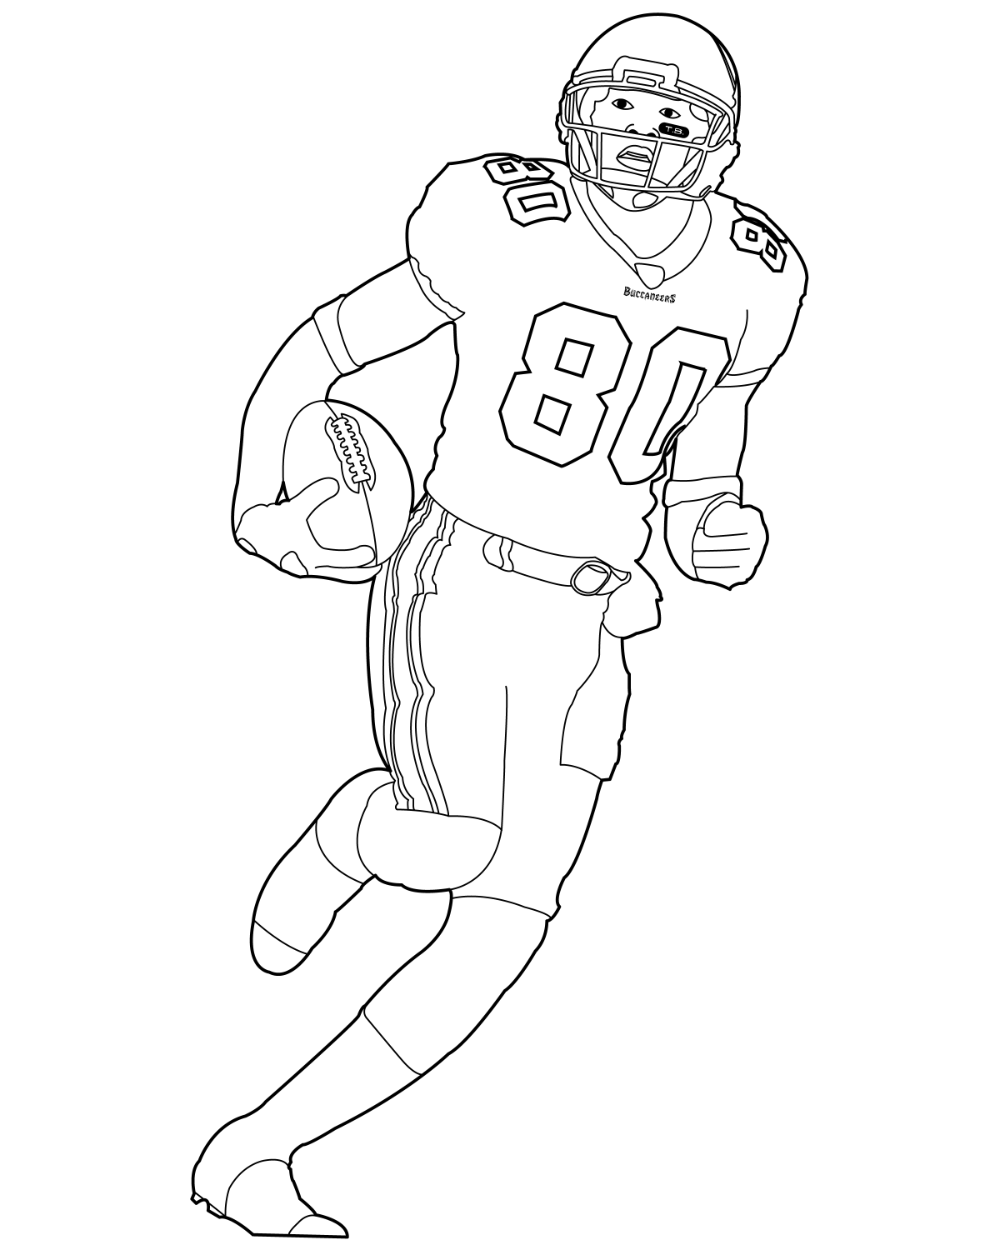 Football Players Coloring Pages Nfl - Gallery - Clip Art Library | Football coloring  pages, Sports coloring pages, Coloring pages